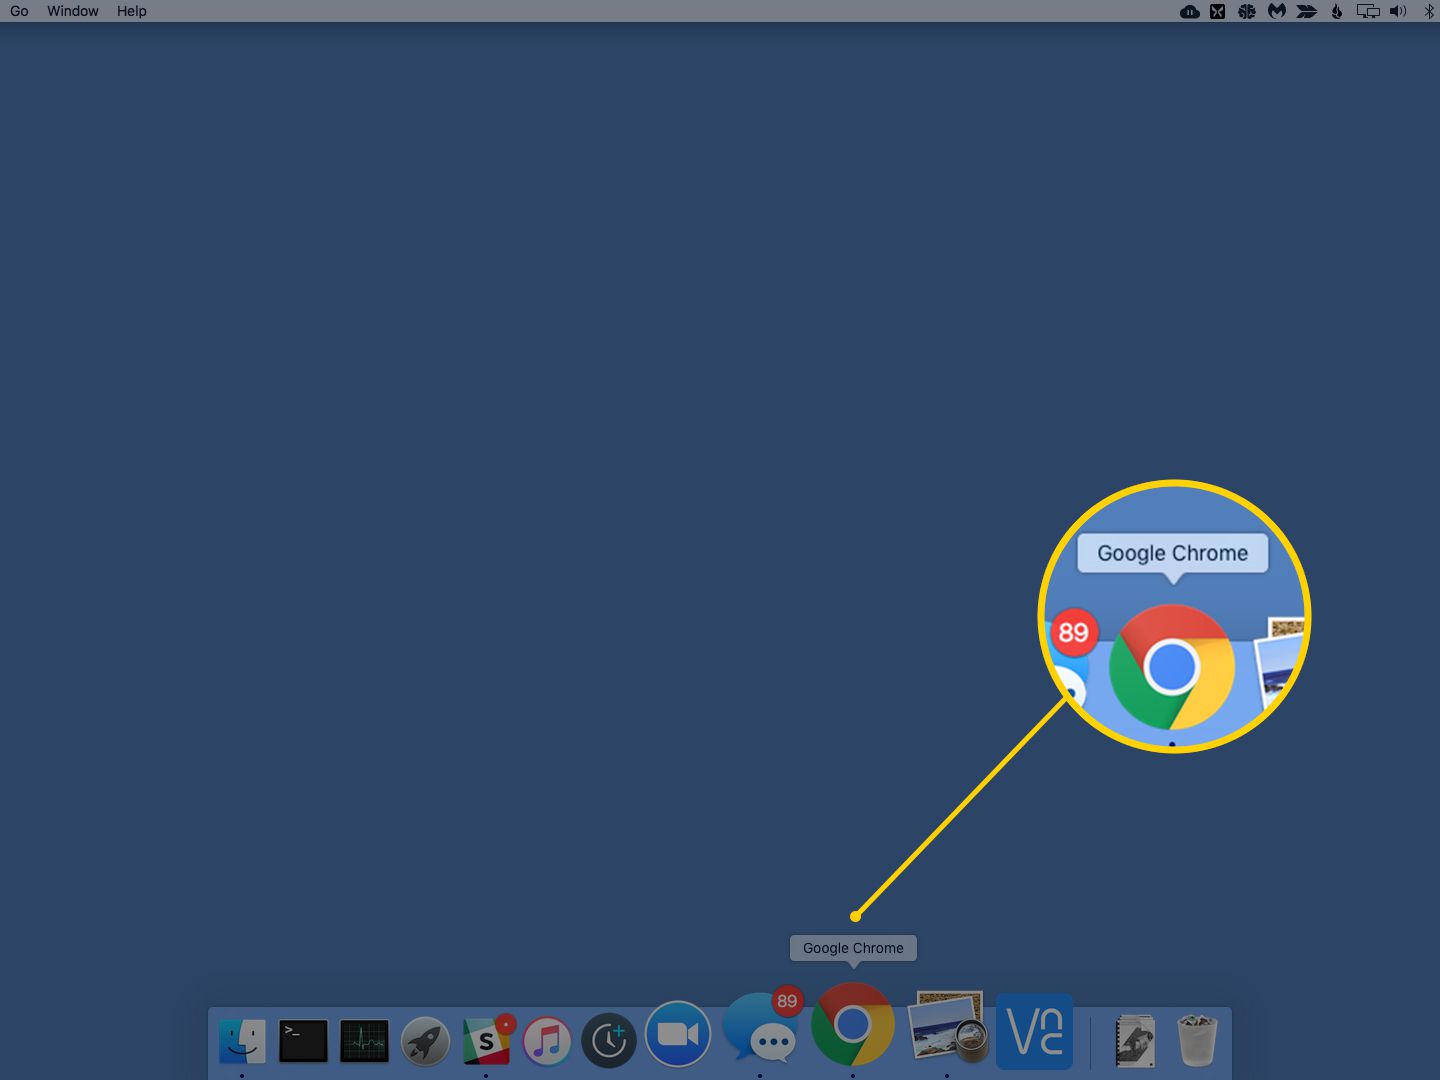 chromecast enabled apps for mac os x